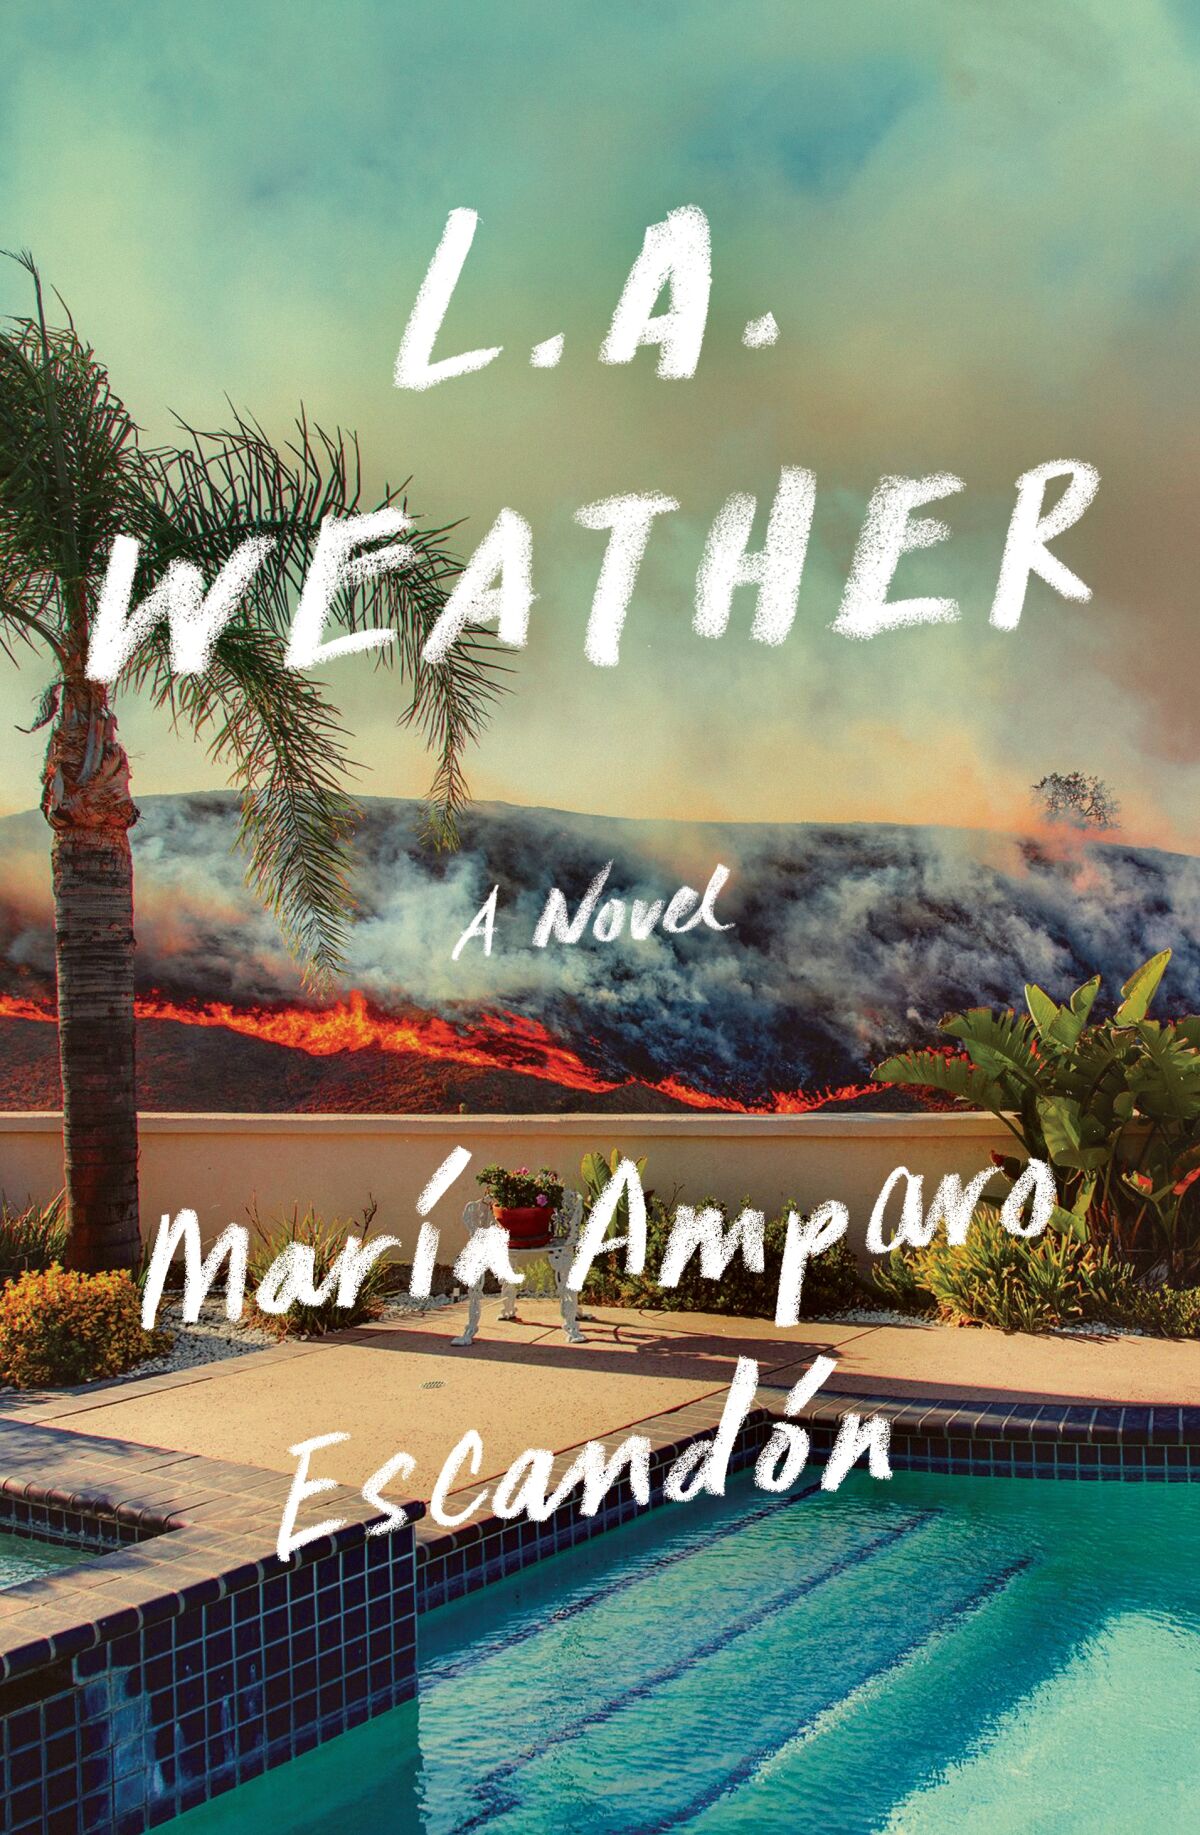 The cover of María Amparo Escandón's "L.A. Weather" shows a swimming pool with a burning hillside in the background.